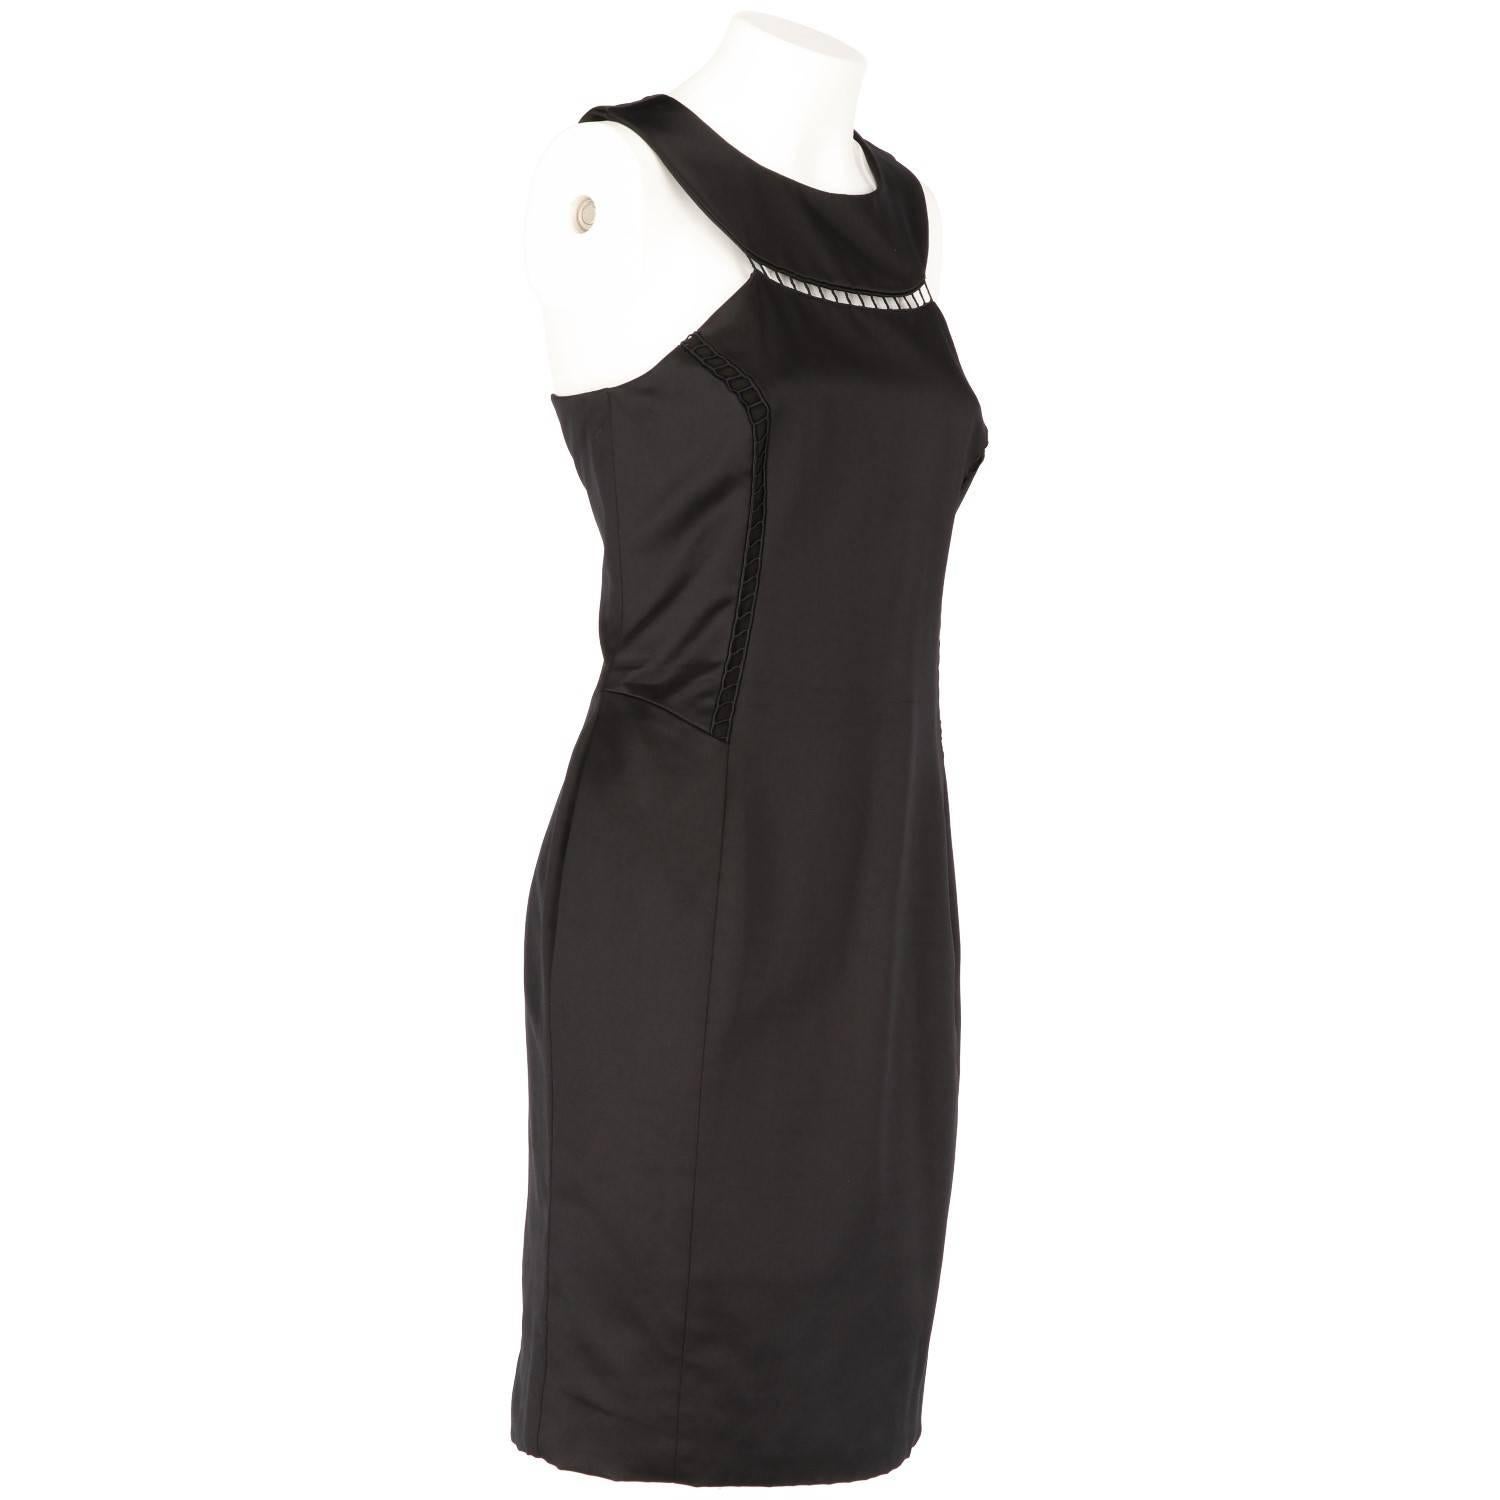 Elegant Givenchy blend silk satin midi dress in black. It features a fitted shape, no sleeves, and is embellished both on the front and the back with a distinctive cut-out décolleté, which recalls the iconic Givenchy dress worn by Audrey Hepburn in